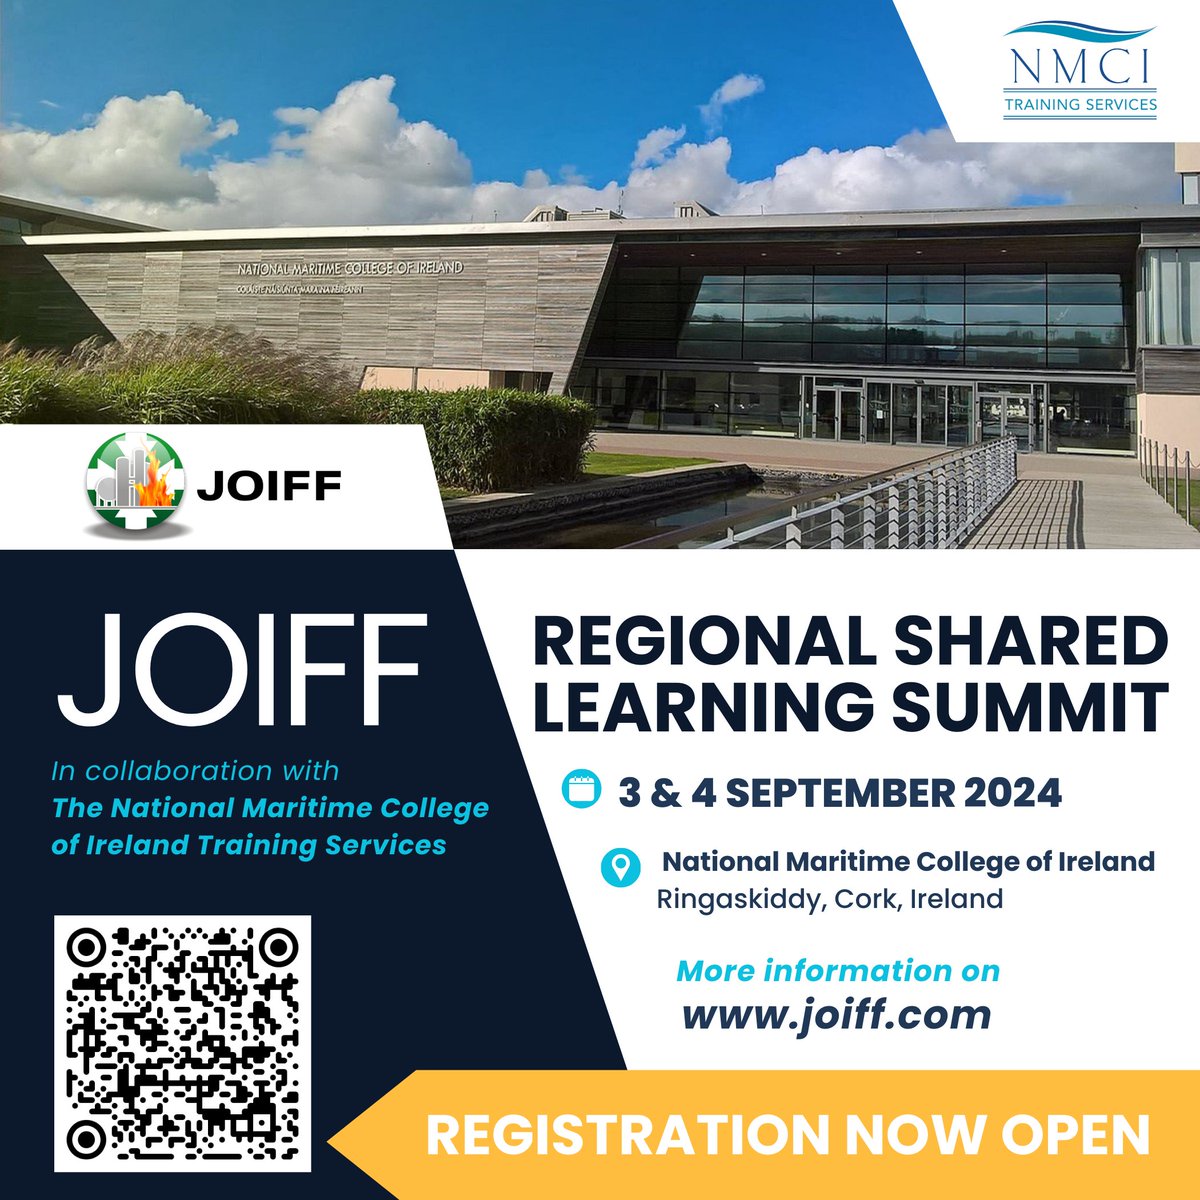 🔥Registration is open: THE JOIFF REGIONAL SHARED LEARNING SUMMIT 2024
in collaboration with the NMCI  
3 & 4 SEPTEMBER 2024 at the NMCI - Ringaskiddy, Cork, Ireland

➡️ Follow this link: joiff.com/event-joiff-re…

#JOIFF #NMCI #REGIONALSHAREDLEARNING #SHAREDLEARNING